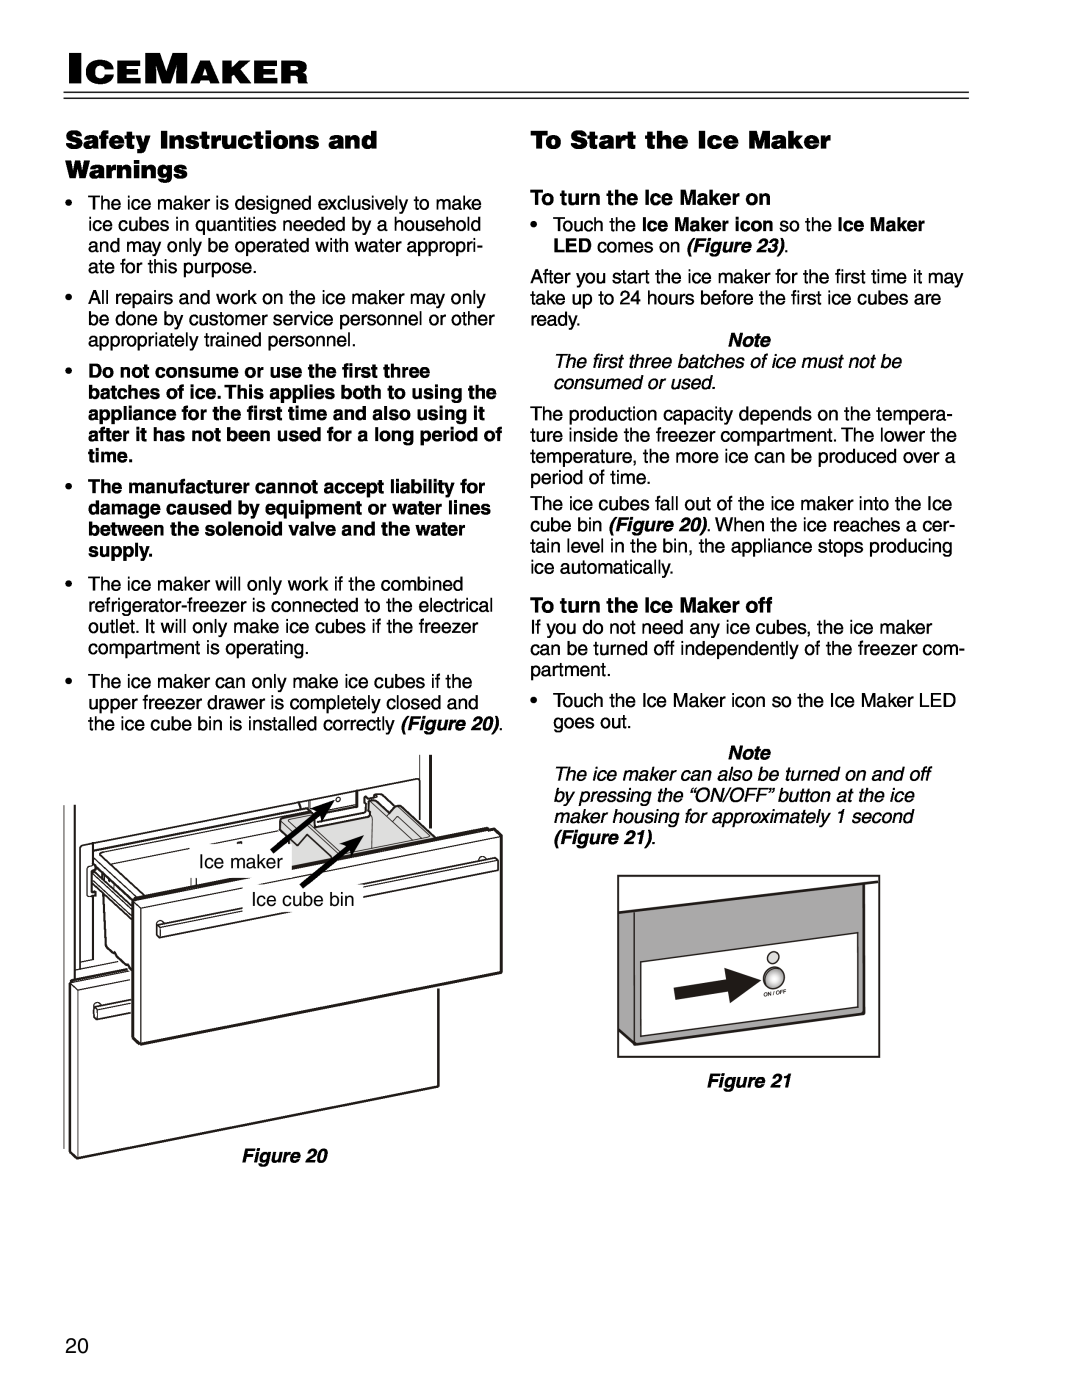 Liebherr CS 7081411-00 manual Icemaker, Safety Instructions and Warnings, To Start the Ice Maker, To turn the Ice Maker on 